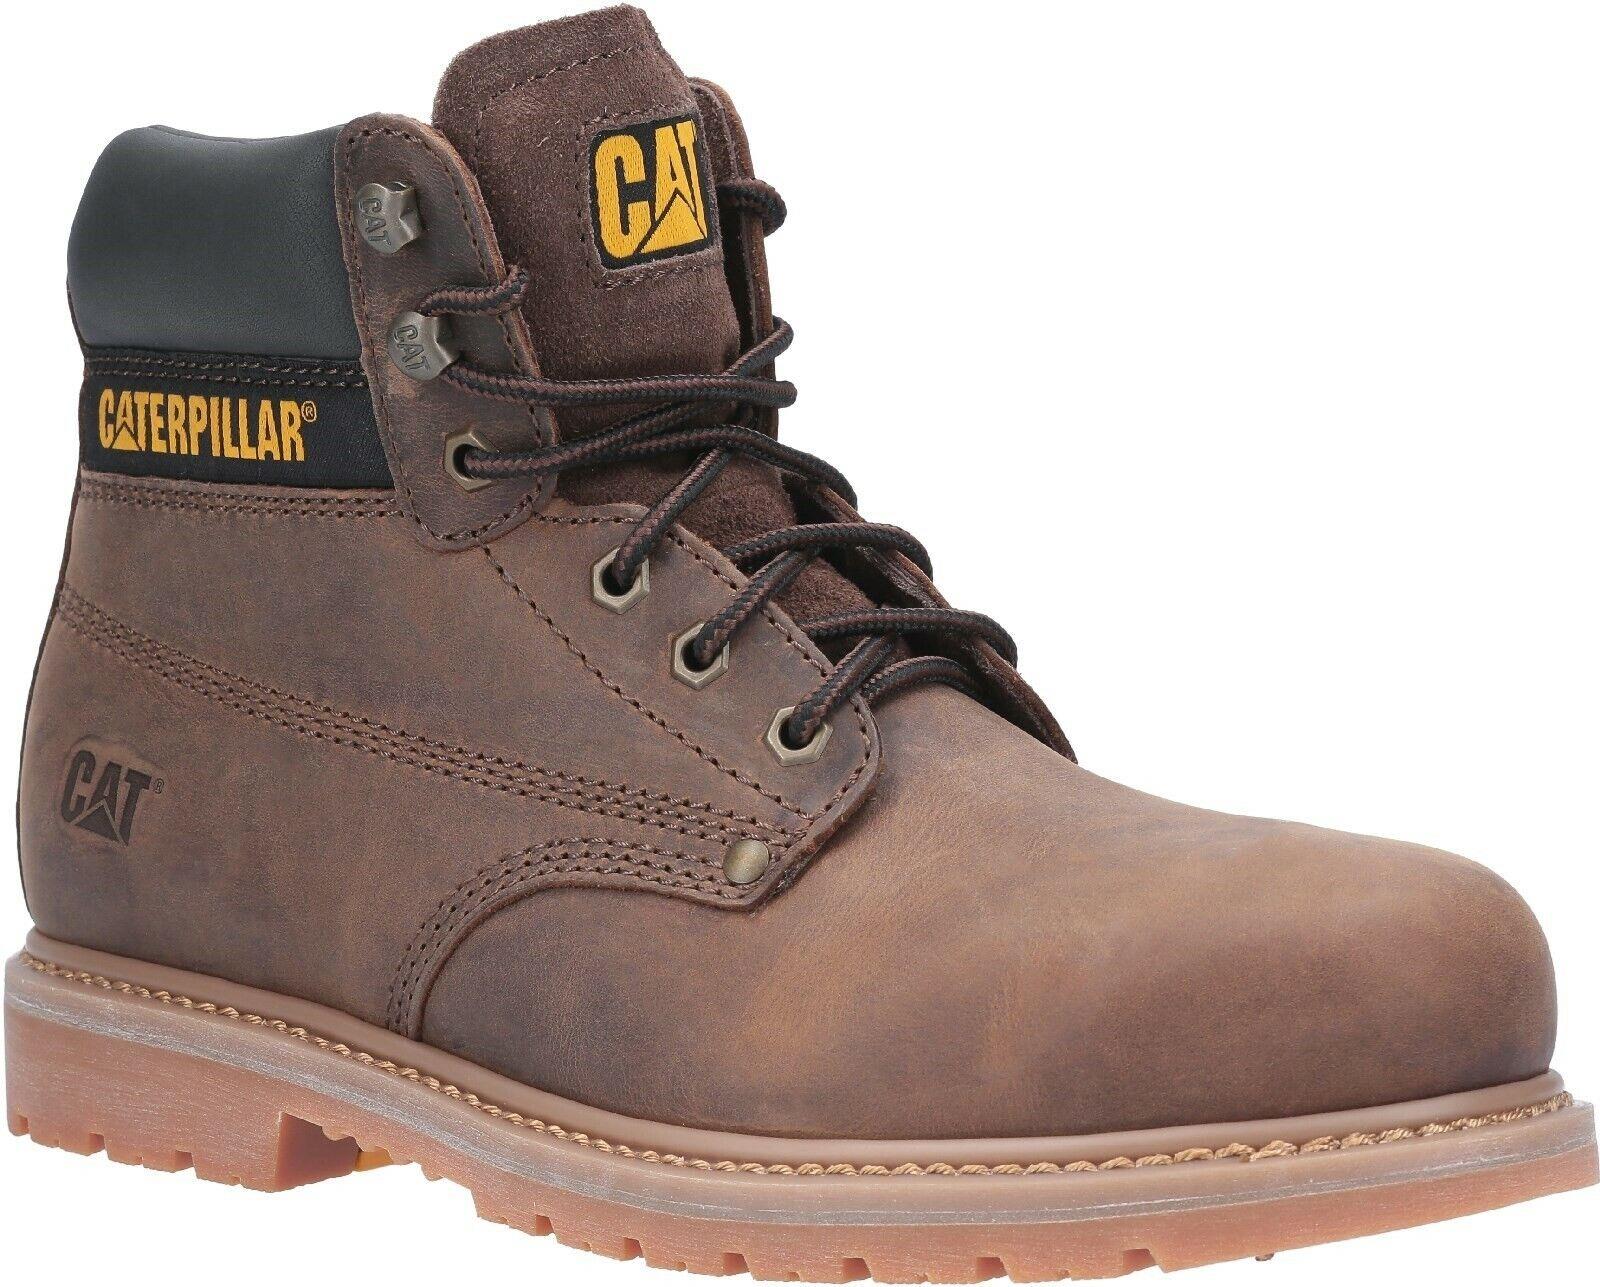 Caterpillar CAT Powerplant SB brown lace up steel toe work safety boot